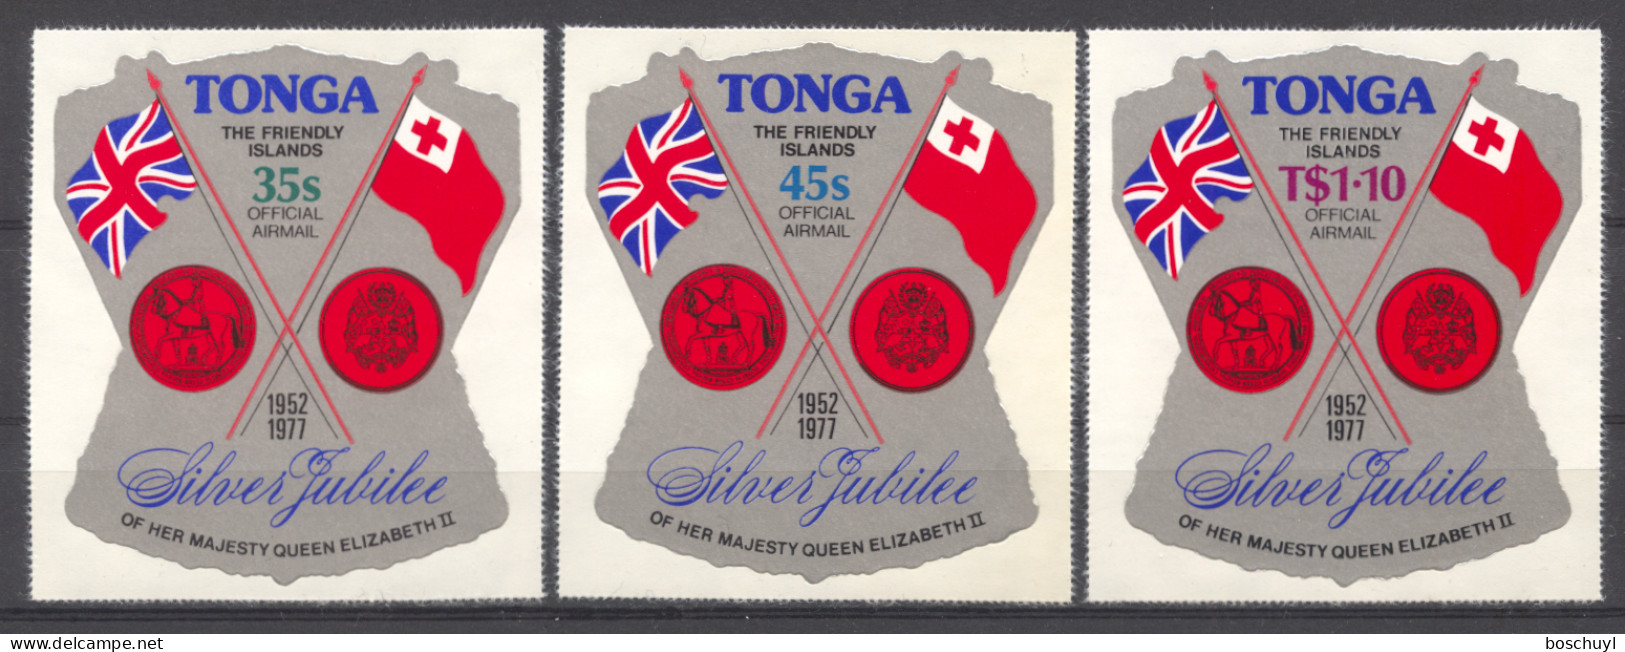 Tonga, 1977, Silver Jubilee Queen Elizabeth, Royal, Service Stamps, Self-Adhesives, MNH, Michel 153-155 - Tonga (1970-...)